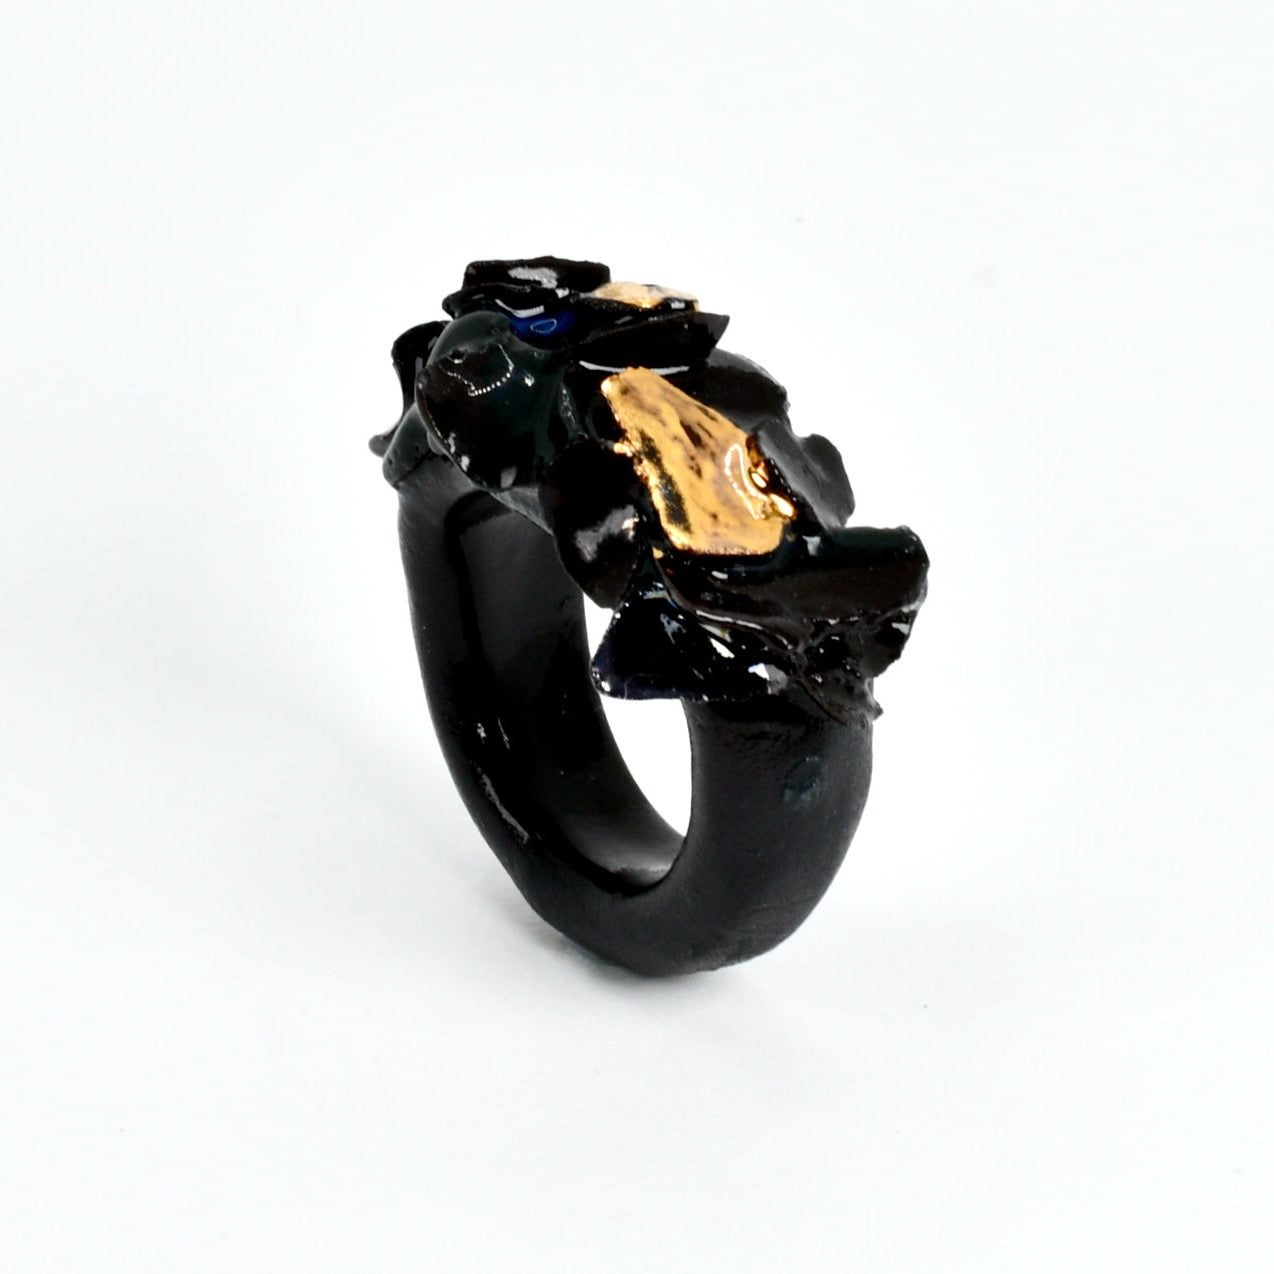 FARPHORIA, black, porcelain, ring, glaze, jewelry, gold, jewellery, gentle, pastel, contemporary, design, elegant, delicate, fine, refined, art, sculpture, wearable, white, one-of-a-kind, unique, hand sculpted, beautiful, statement, handmade, classy, London, United Kingdom, white, engagement, british, designer, artist, conceptual, inspired, bright, luxury, luxurious, look, fashionable, original, perfect, colors, gold, gift, ideal, present, gothic, feel, shattered, stone, inspiration, sculptural, rich